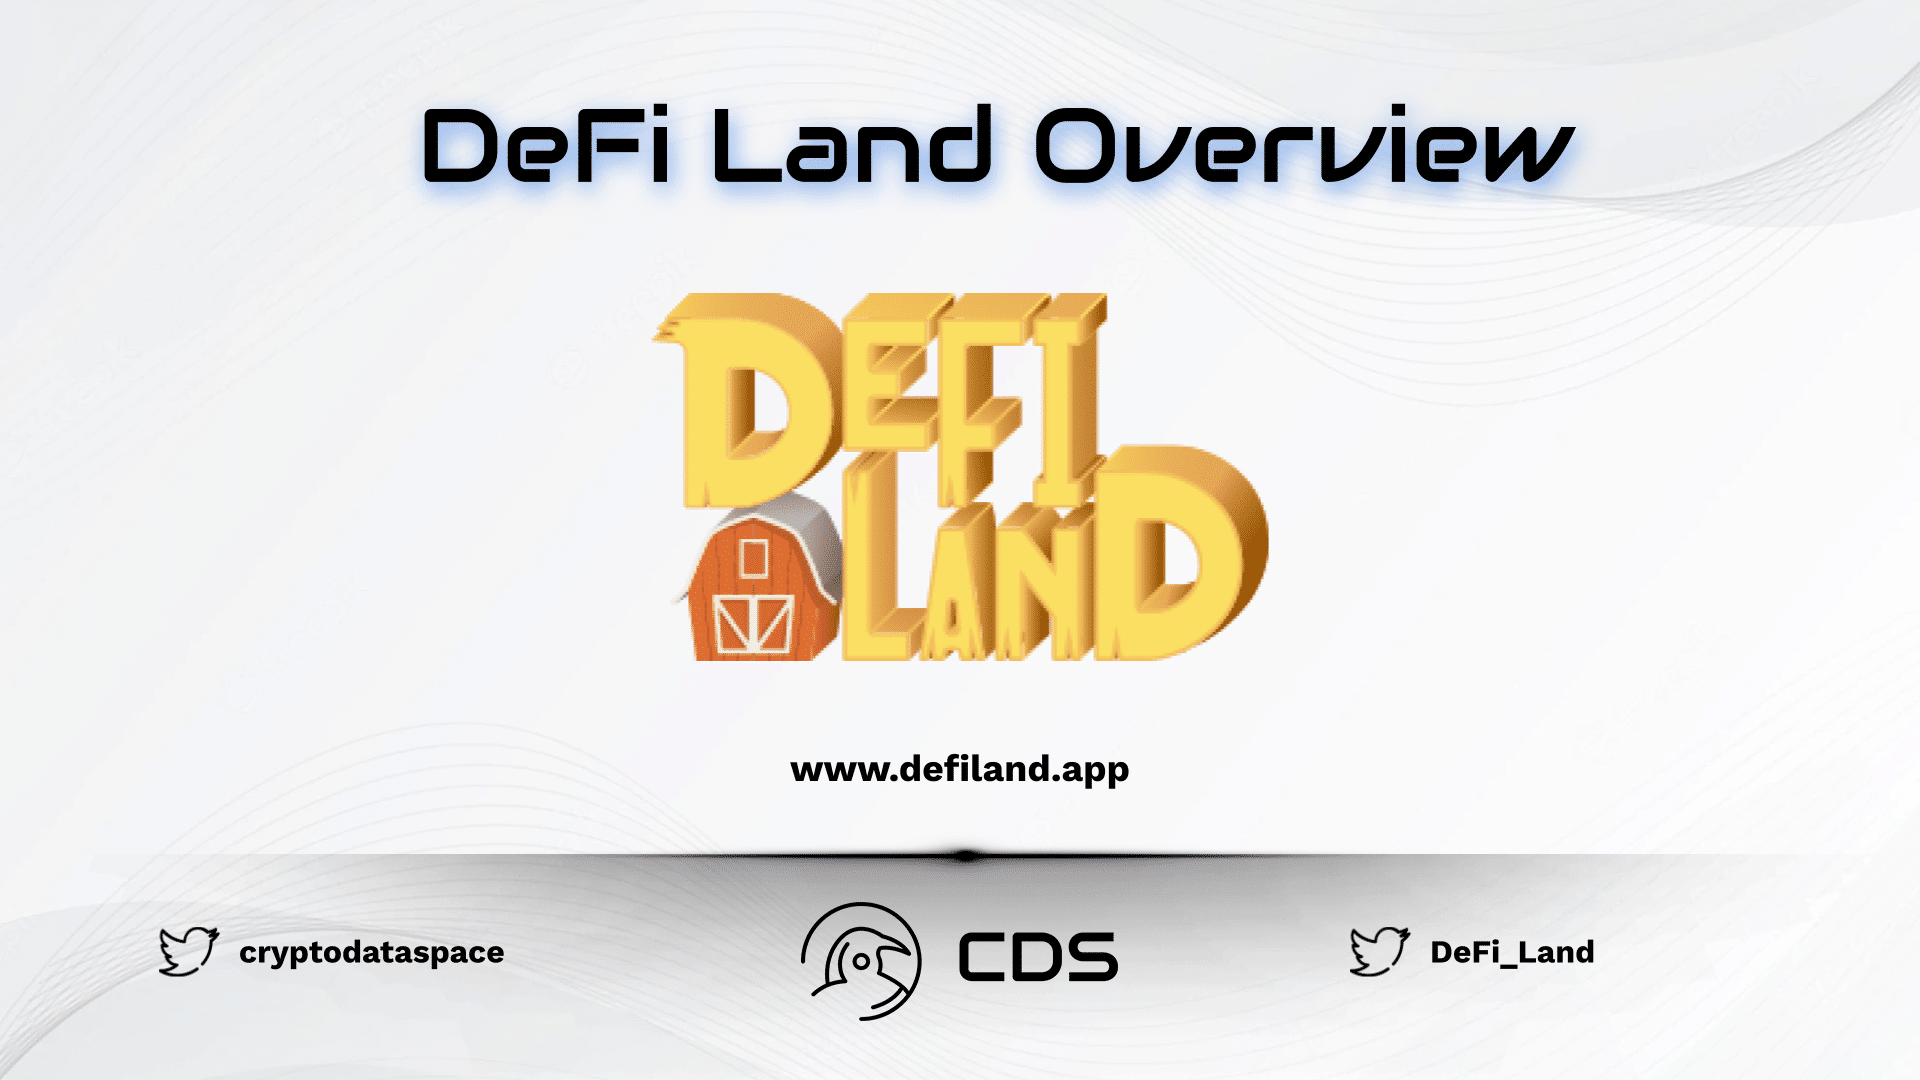 DeFi Land Overview